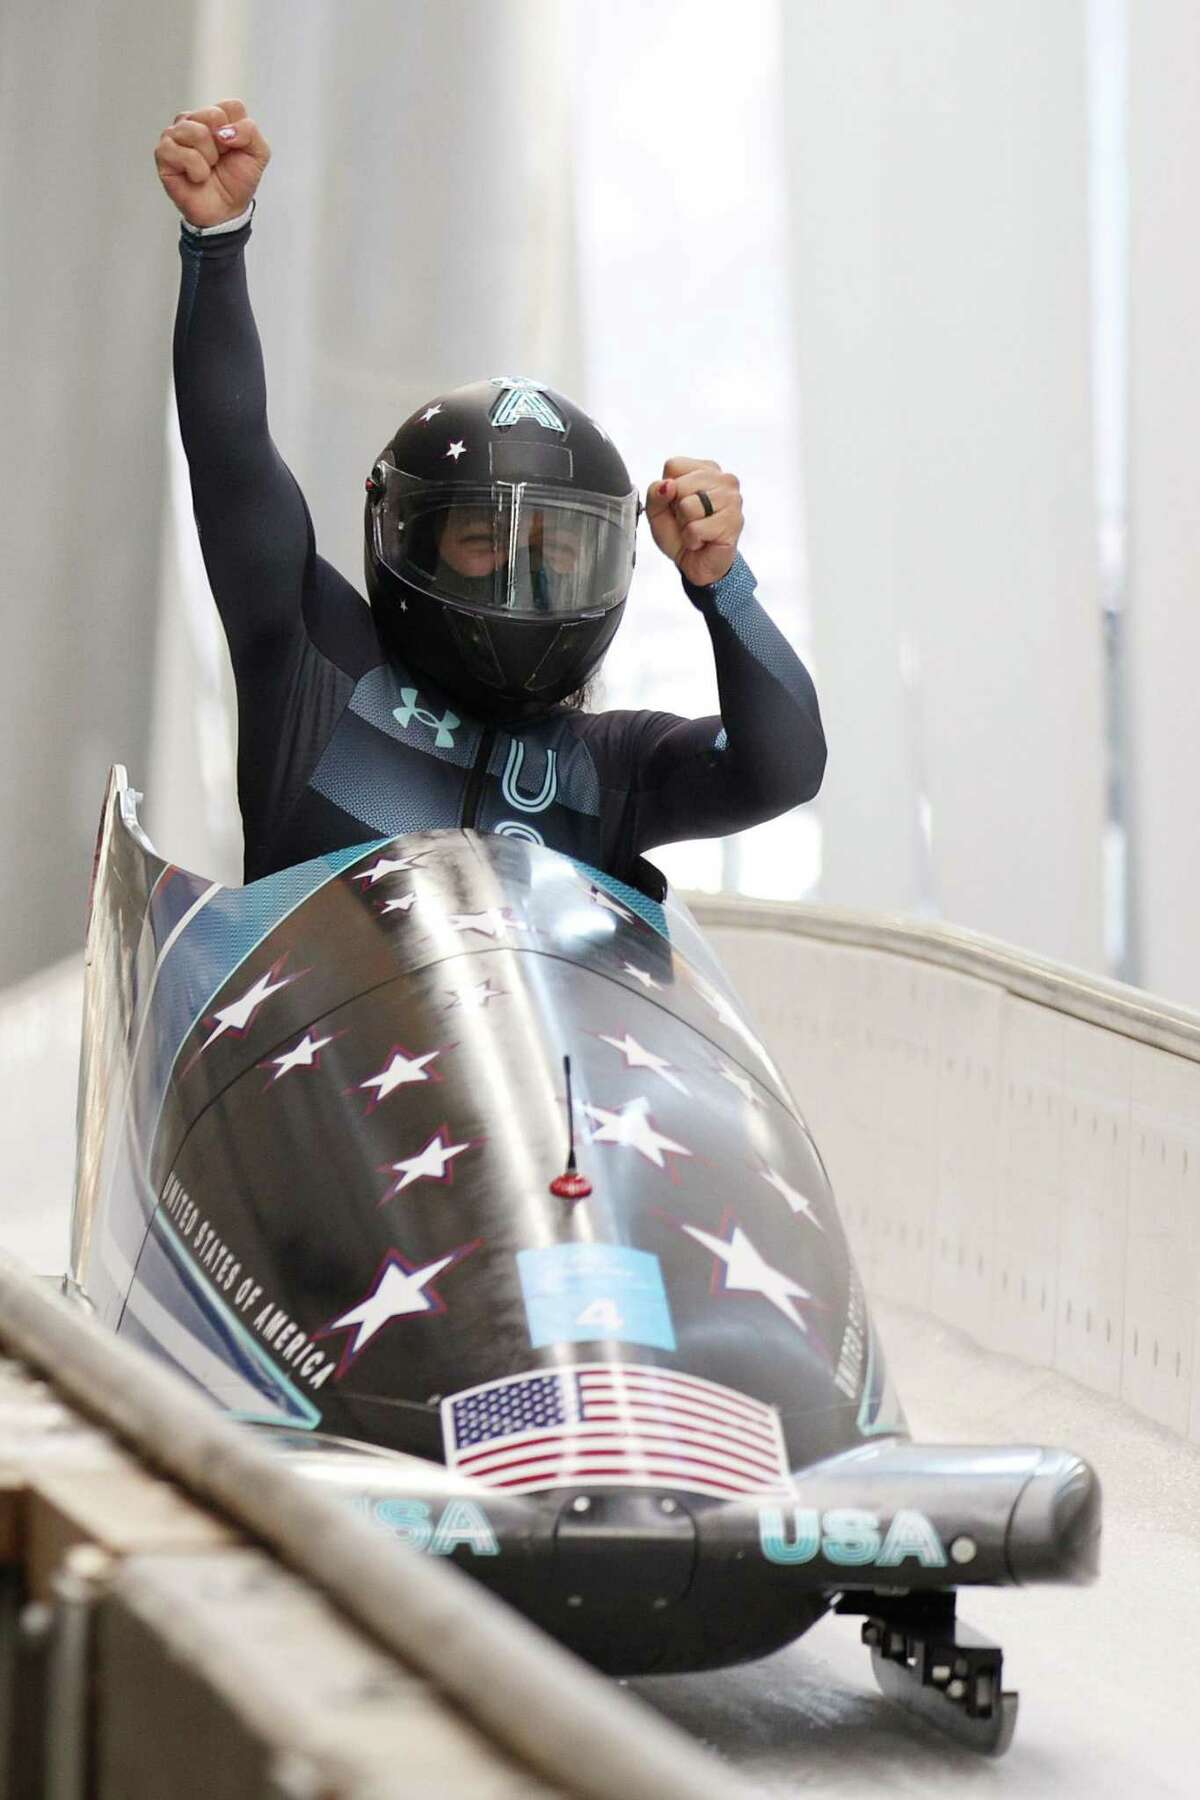 YANQING, CHINA - FEBRUARY 14: Silver medallist Elana Meyers Taylor of Team United States celebrates during the Women's Monobob Bobsleigh Heat 4 on day 10 of Beijing 2022 Winter Olympic Games at National Sliding Centre on February 14, 2022 in Yanqing, China. (Photo by Adam Pretty/Getty Images)